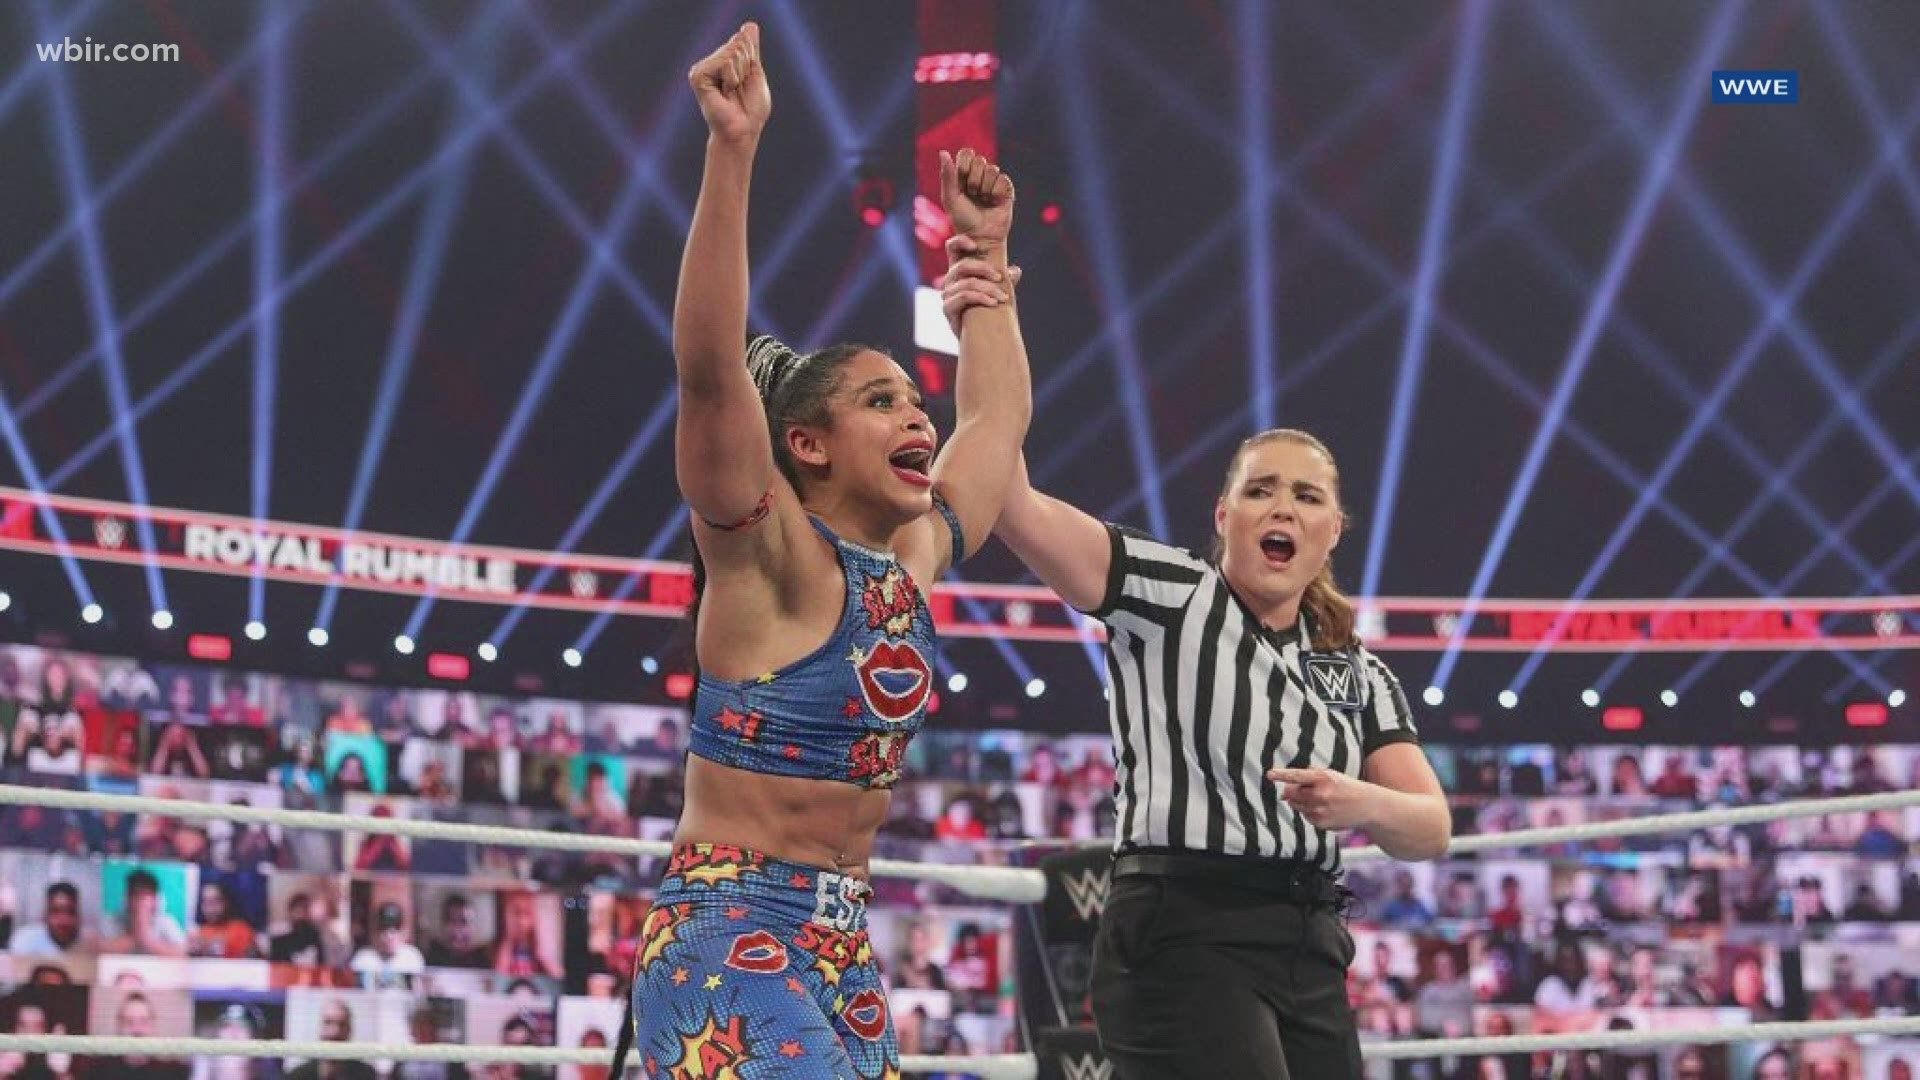 Bianca Belair is the 2021 winner of WWE's women's Royal Rumble match. She's the first Black woman to win the match. The journey to her victory starts in Knoxville.